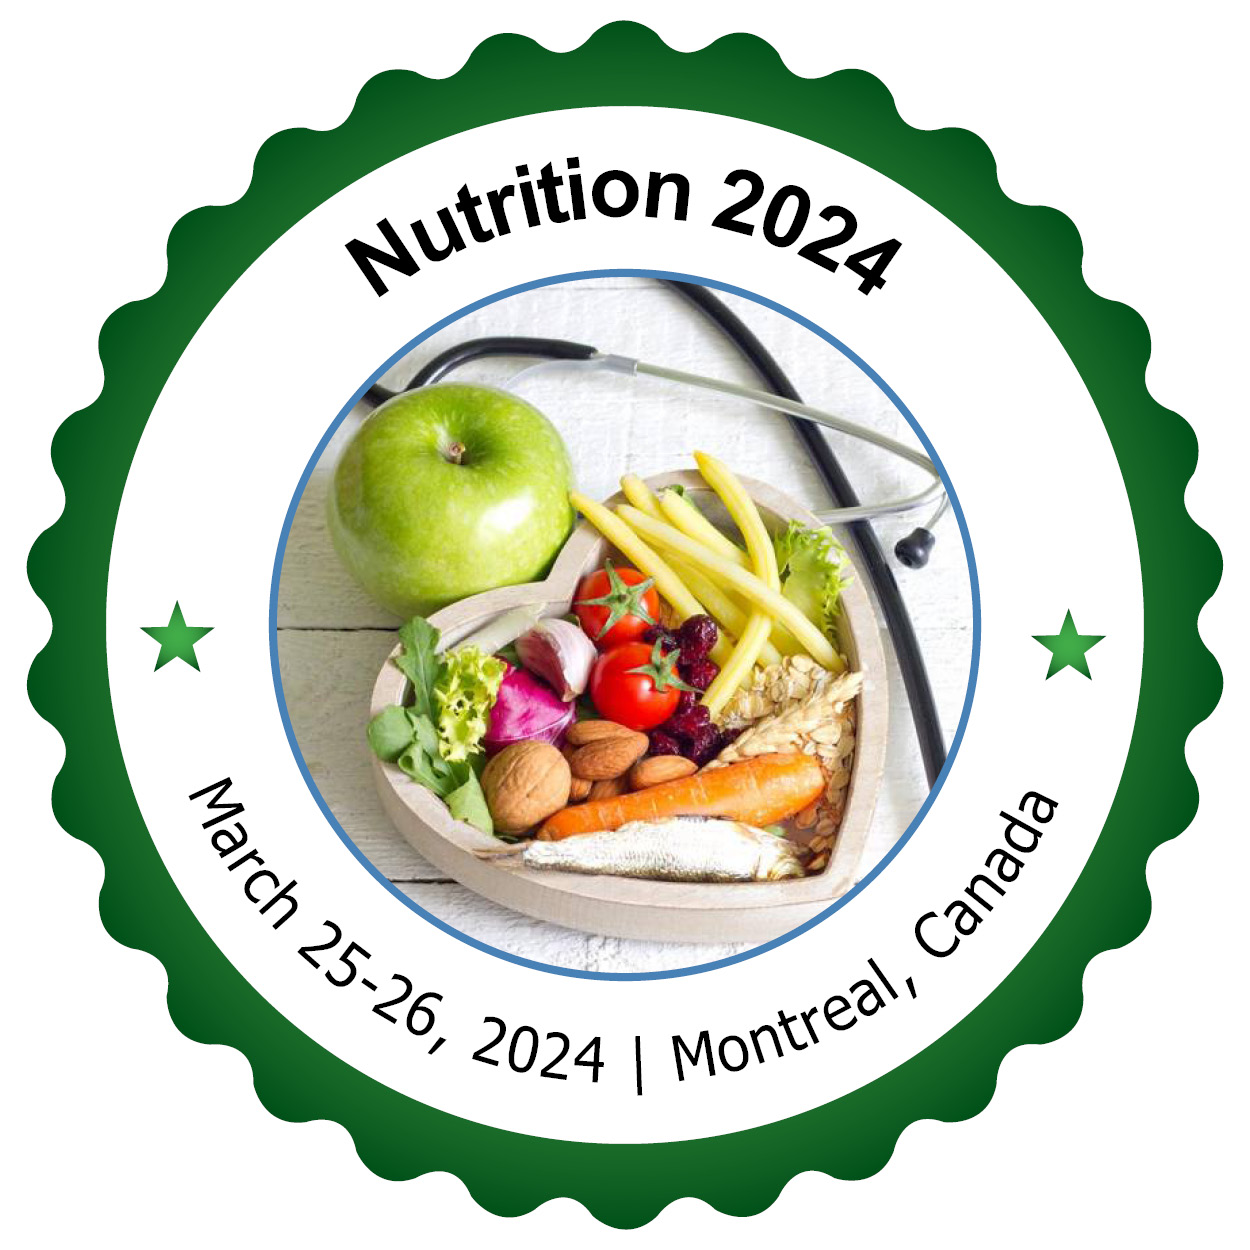 29th International Conference on Nutrition and Dietestics